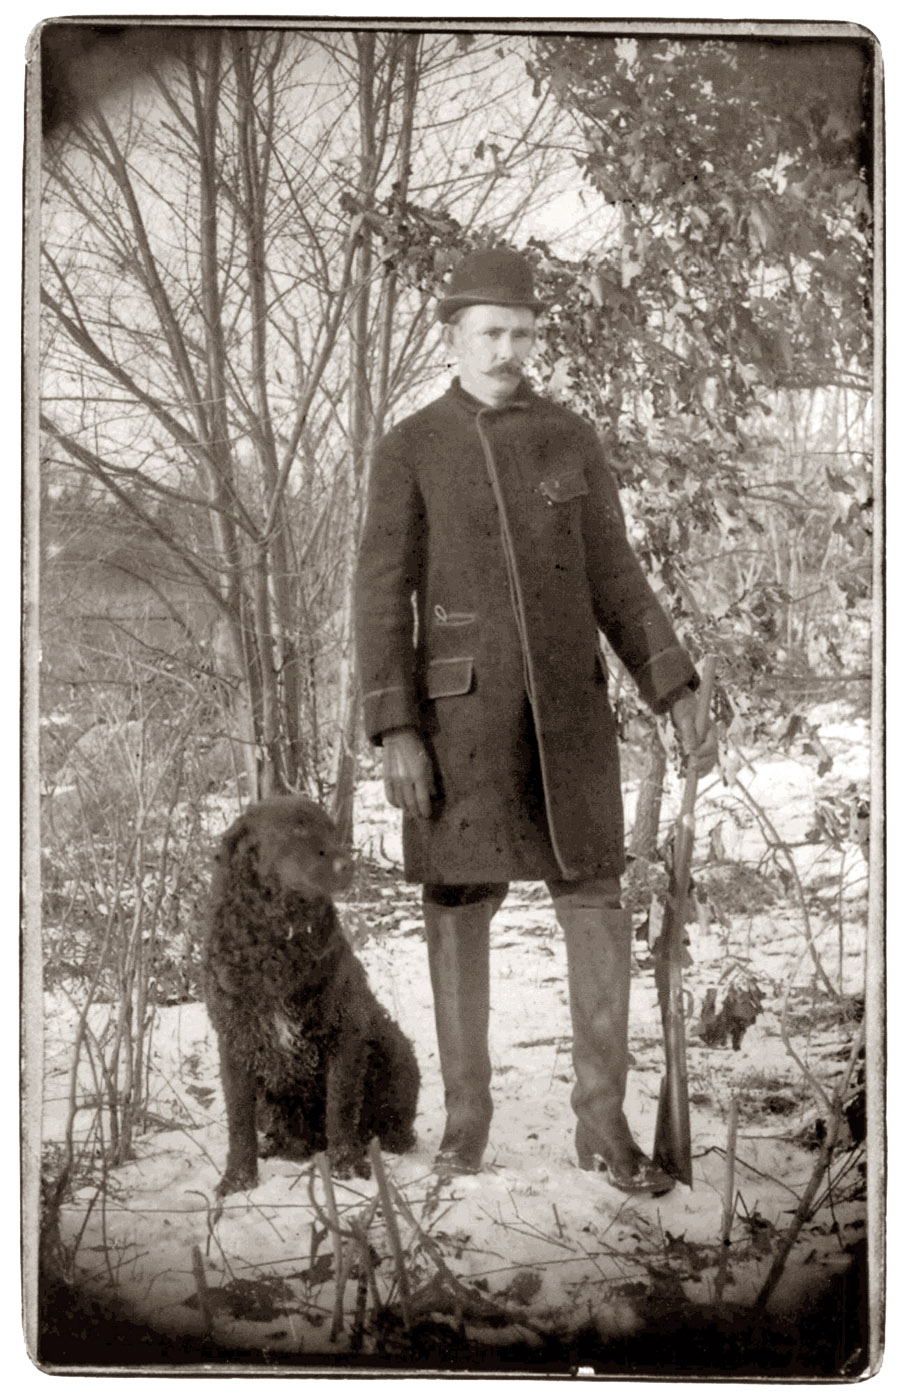 Royal Ernest Bibbins of Bridgeport, Connecticut, ready to hunt with heavy clothing, derby, boots, dog and rifle circa 1890. I never realized my grandfather was a hunter, but here he is all set to go. - Robert Edward McKenna